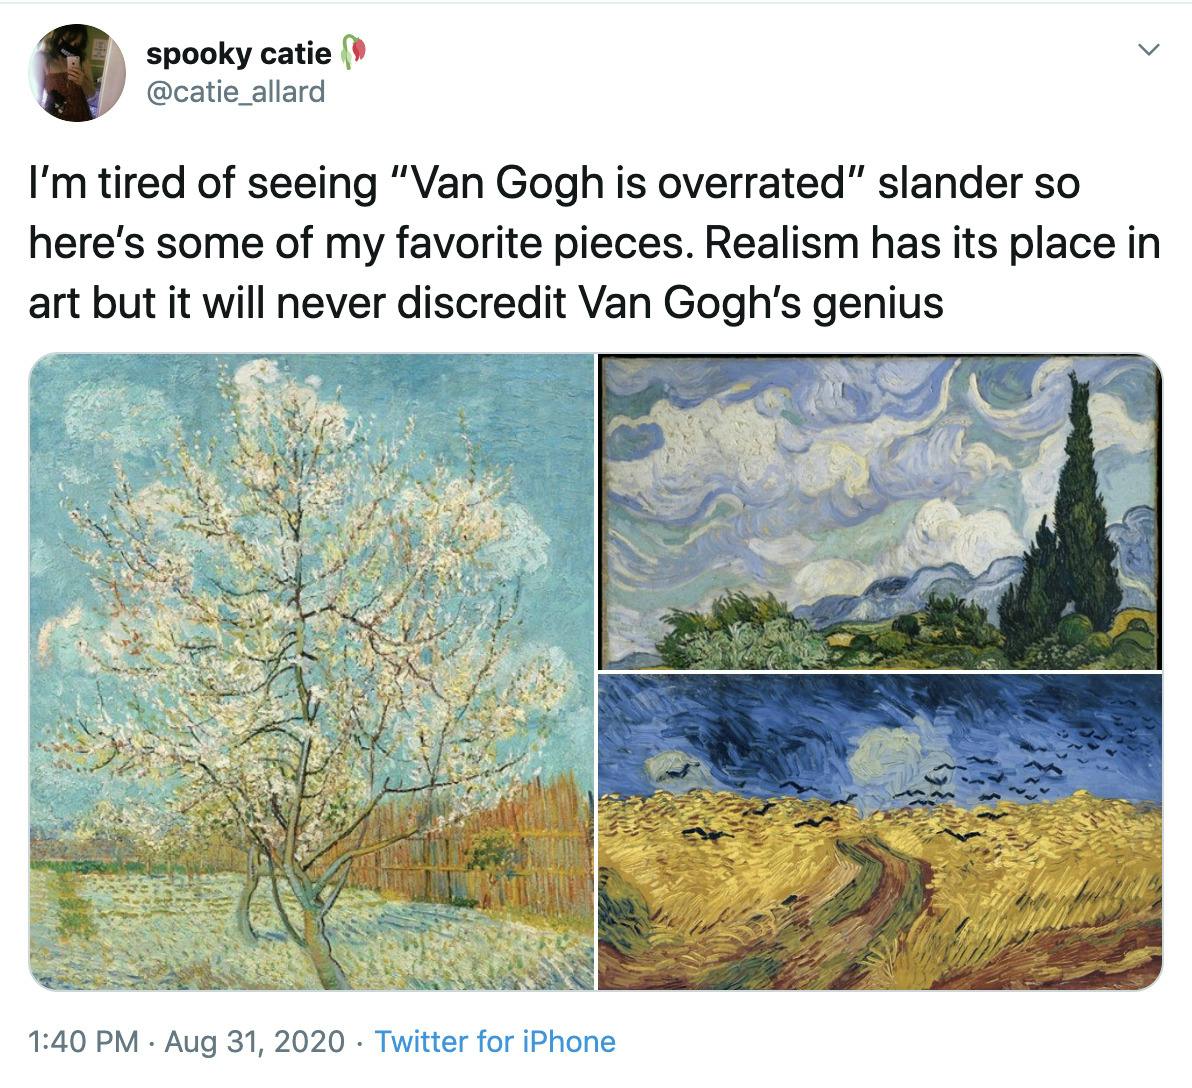 "I’m tired of seeing “Van Gogh is overrated” slander so here’s some of my favorite pieces. Realism has its place in art but it will never discredit Van Gogh’s genius"  Van Gogh's The Peach Tree, a softly curving  tree against a green and blue backdrop, Van Gogh's  Wheat Field, an abstract painting of wheat and dark green trees against a blue sky, and Van Gogh's Wheatfield with Crows, an abstract painting of a wheat field under a threatening dark blue sky with crows